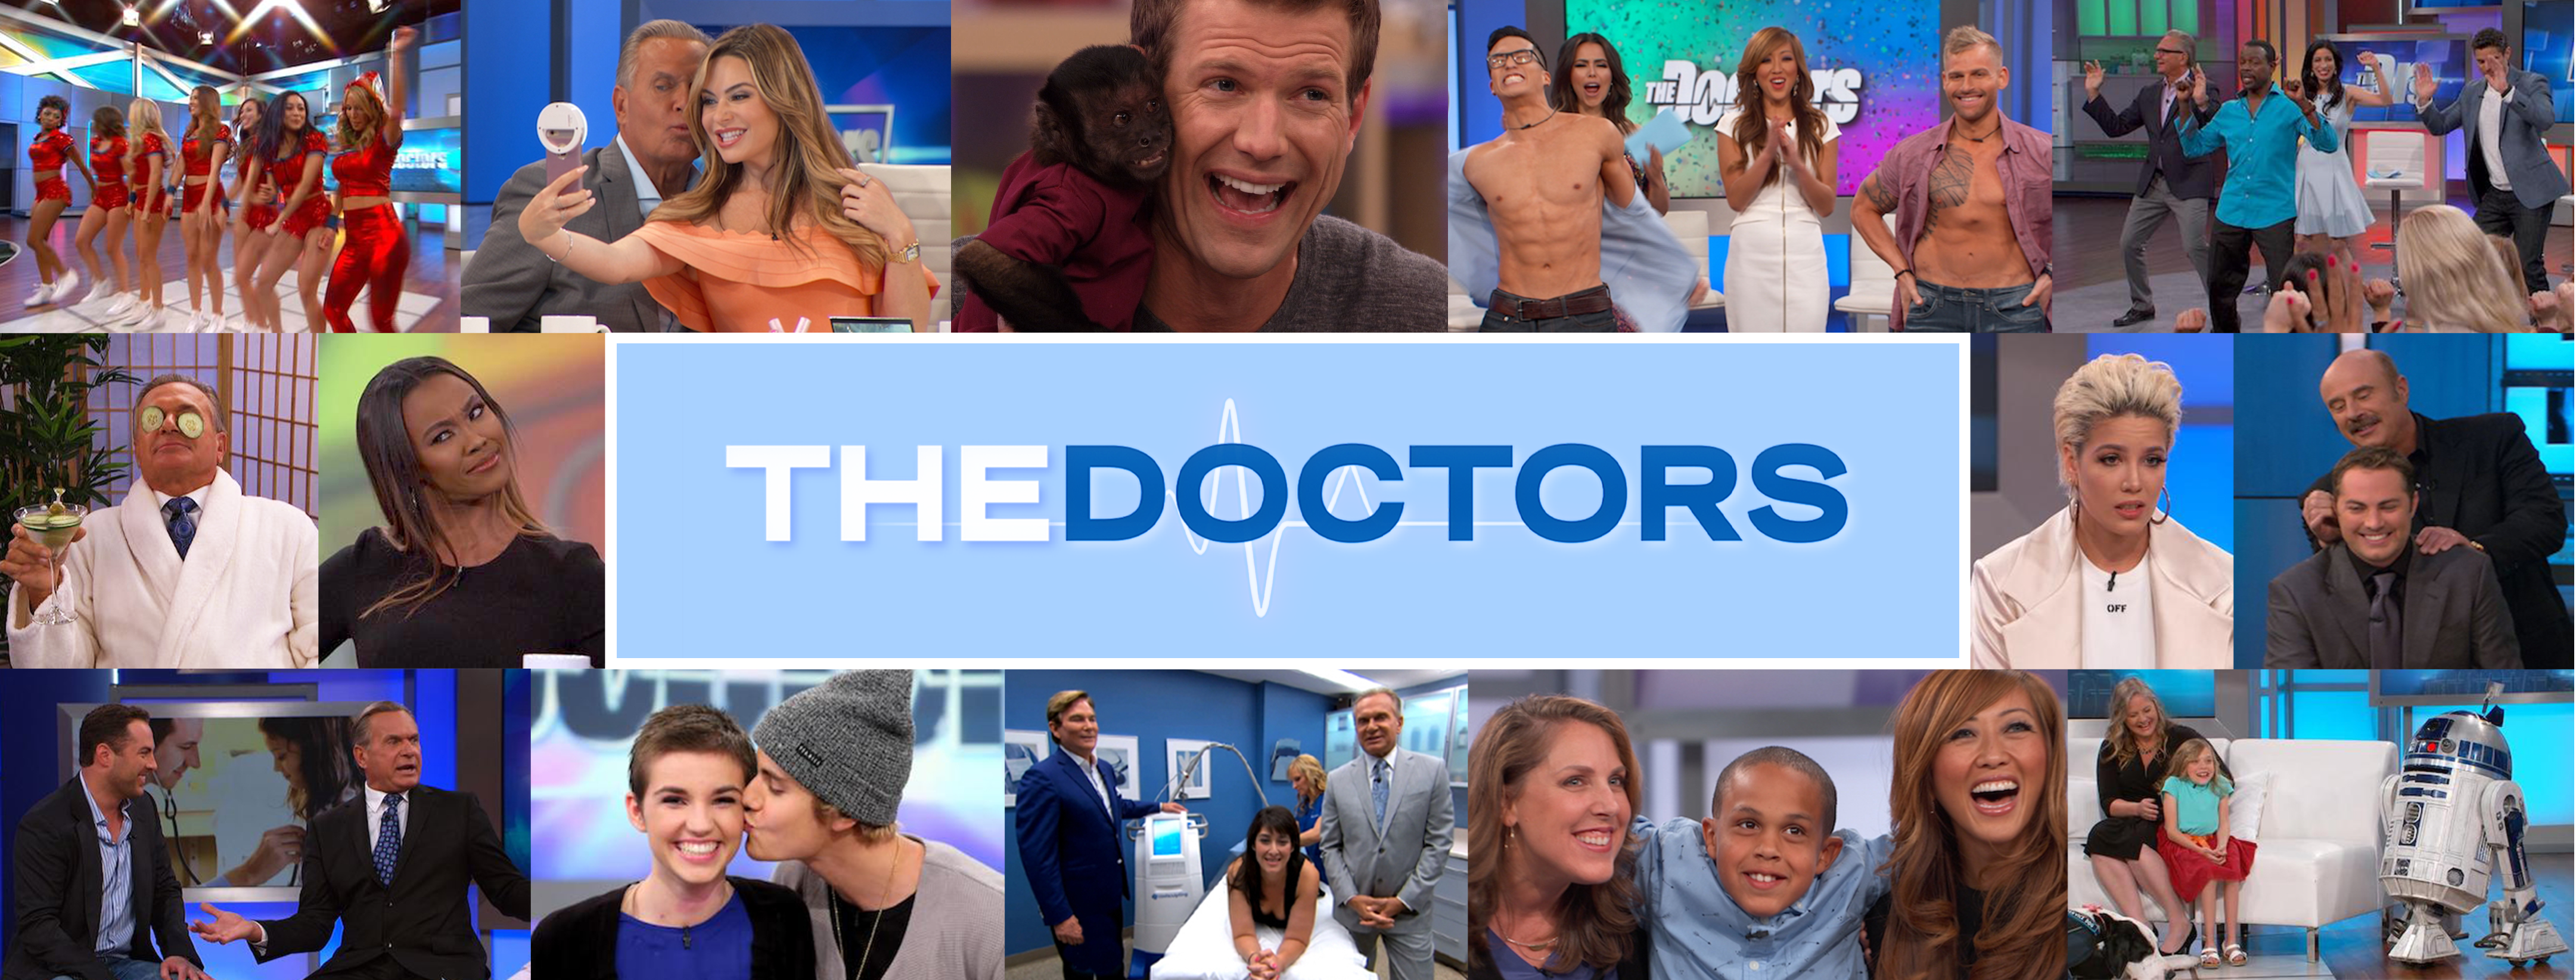 Surviving a Heart Attack | The Doctors TV Show